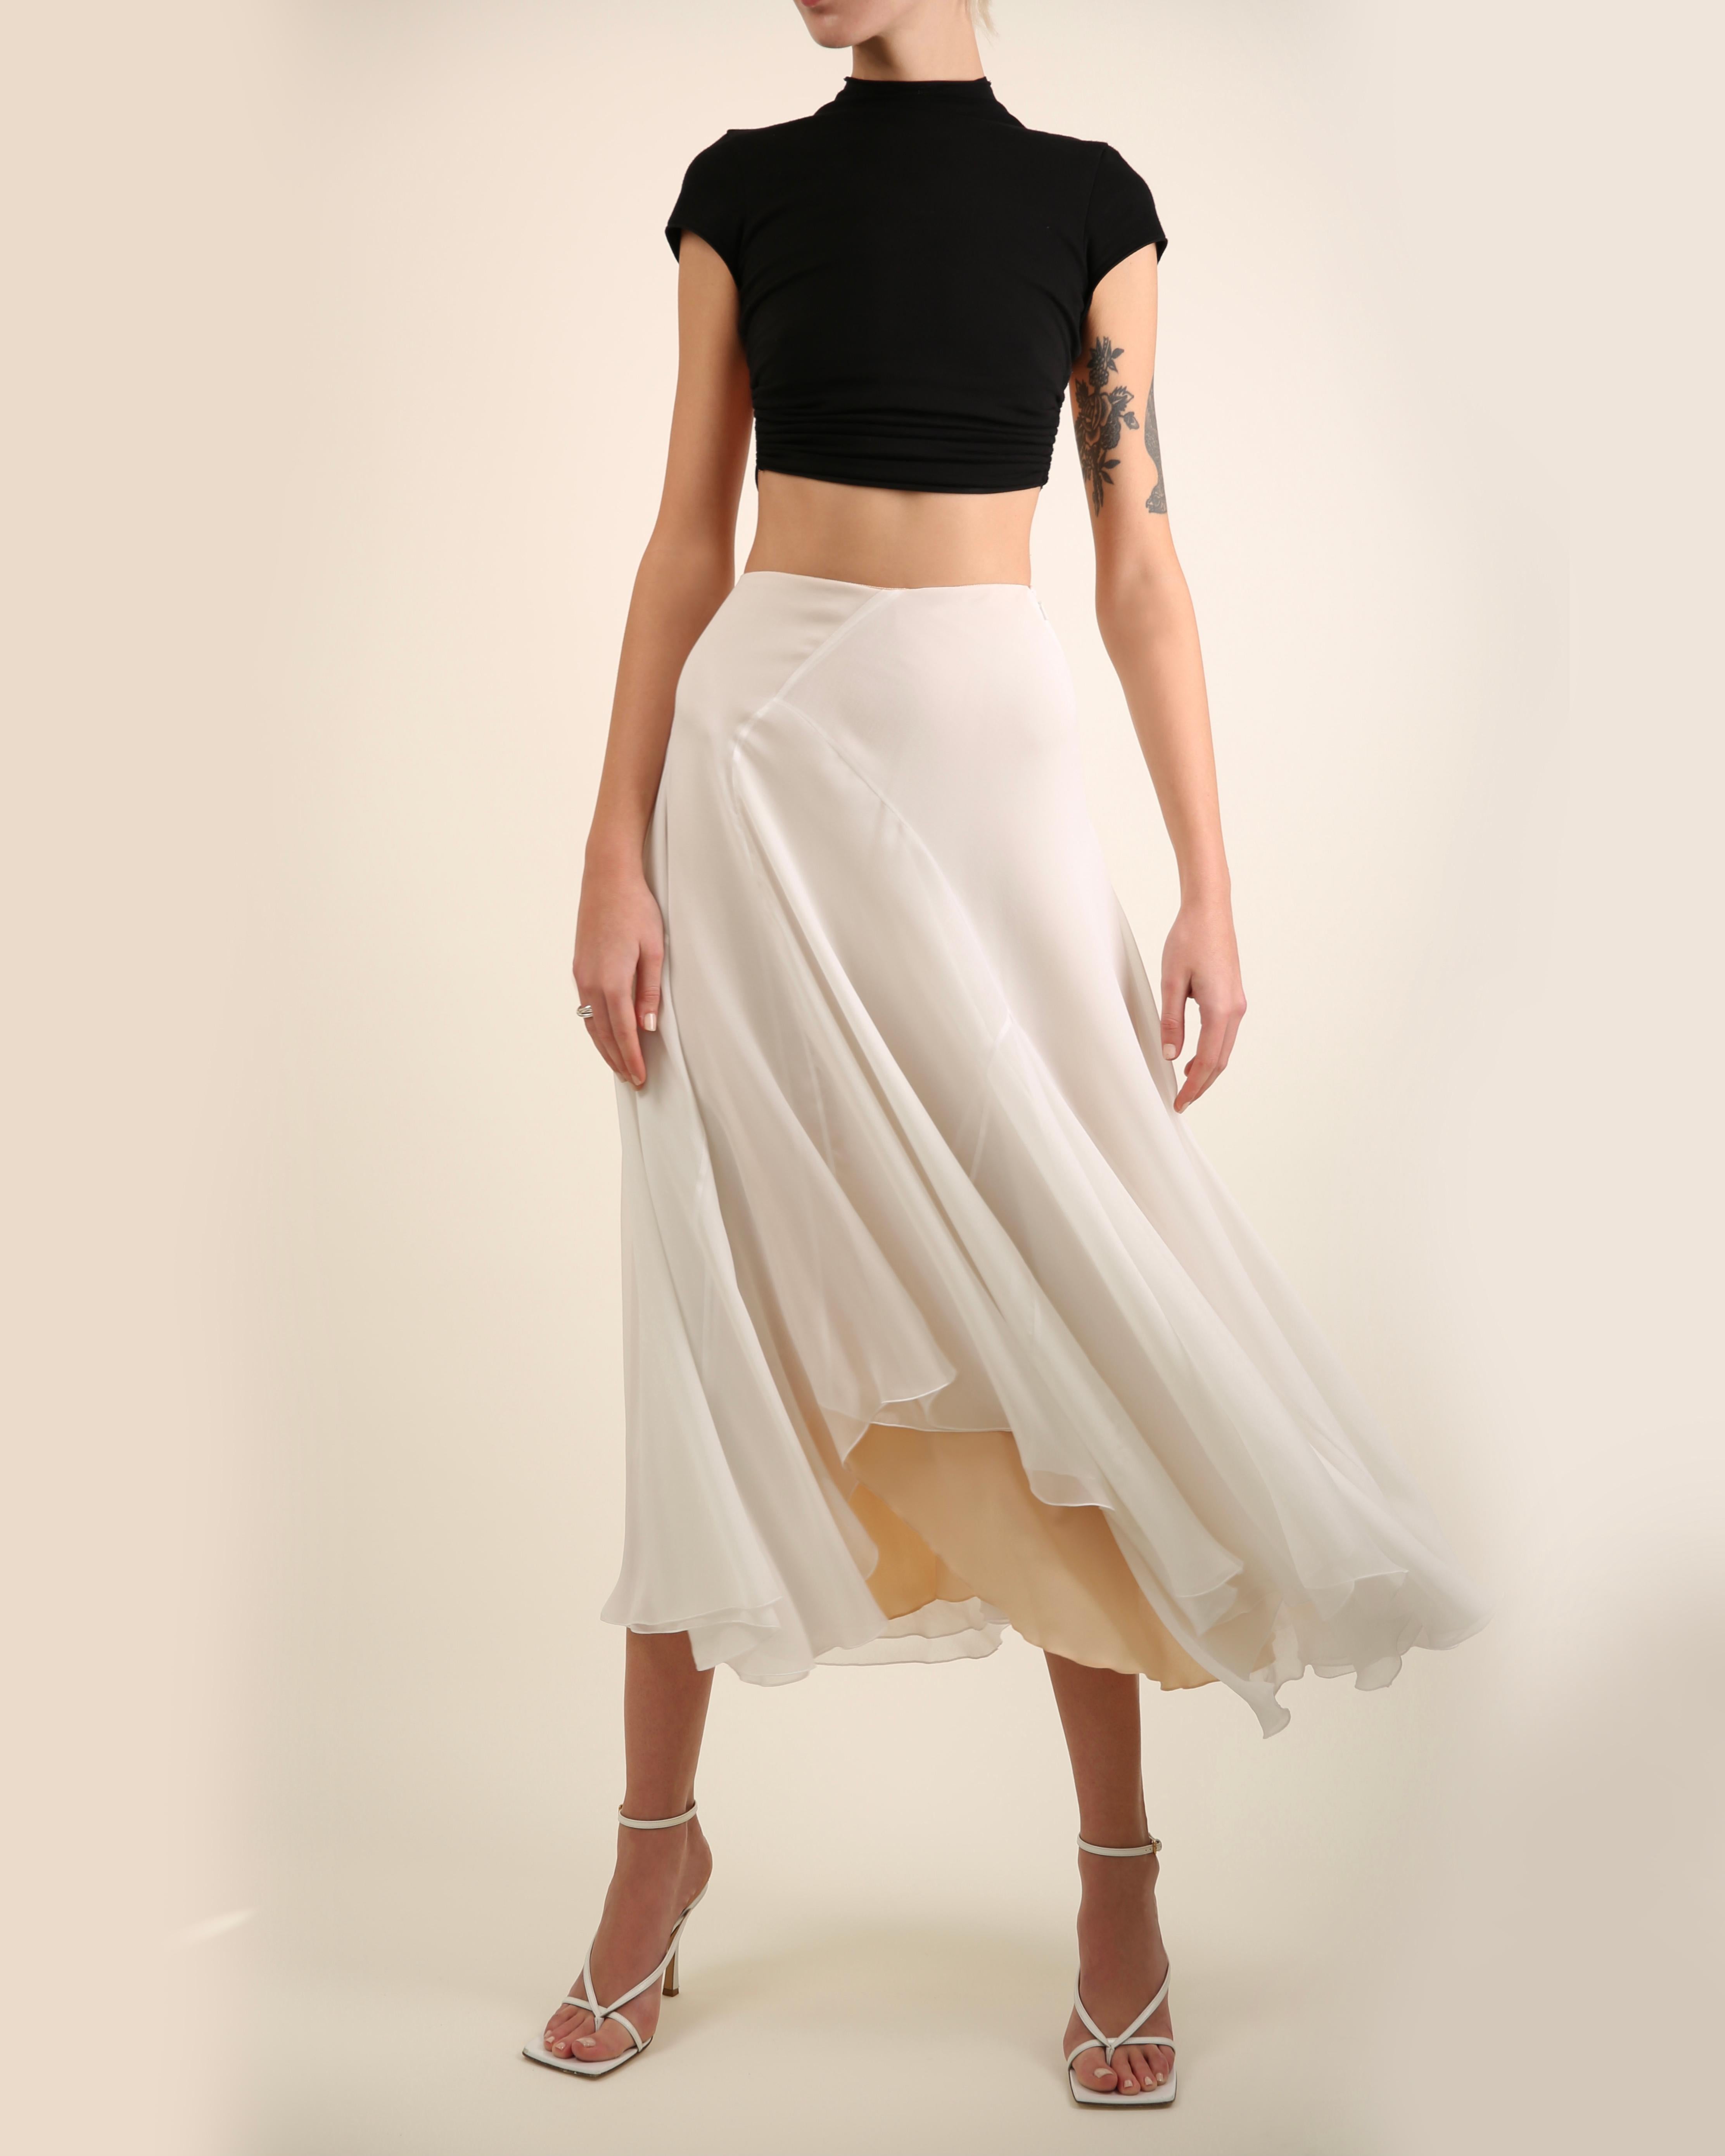 Chloe high waisted white skirt
Double layered with a third nude layer consisting of an attached slip to prevent the skirt from being sheer
Asymmetrical hem
Concealed side zip

FREE SHIPPING WORLDWIDE!!

Composition:
100% polyester

Size:
FR 36

In